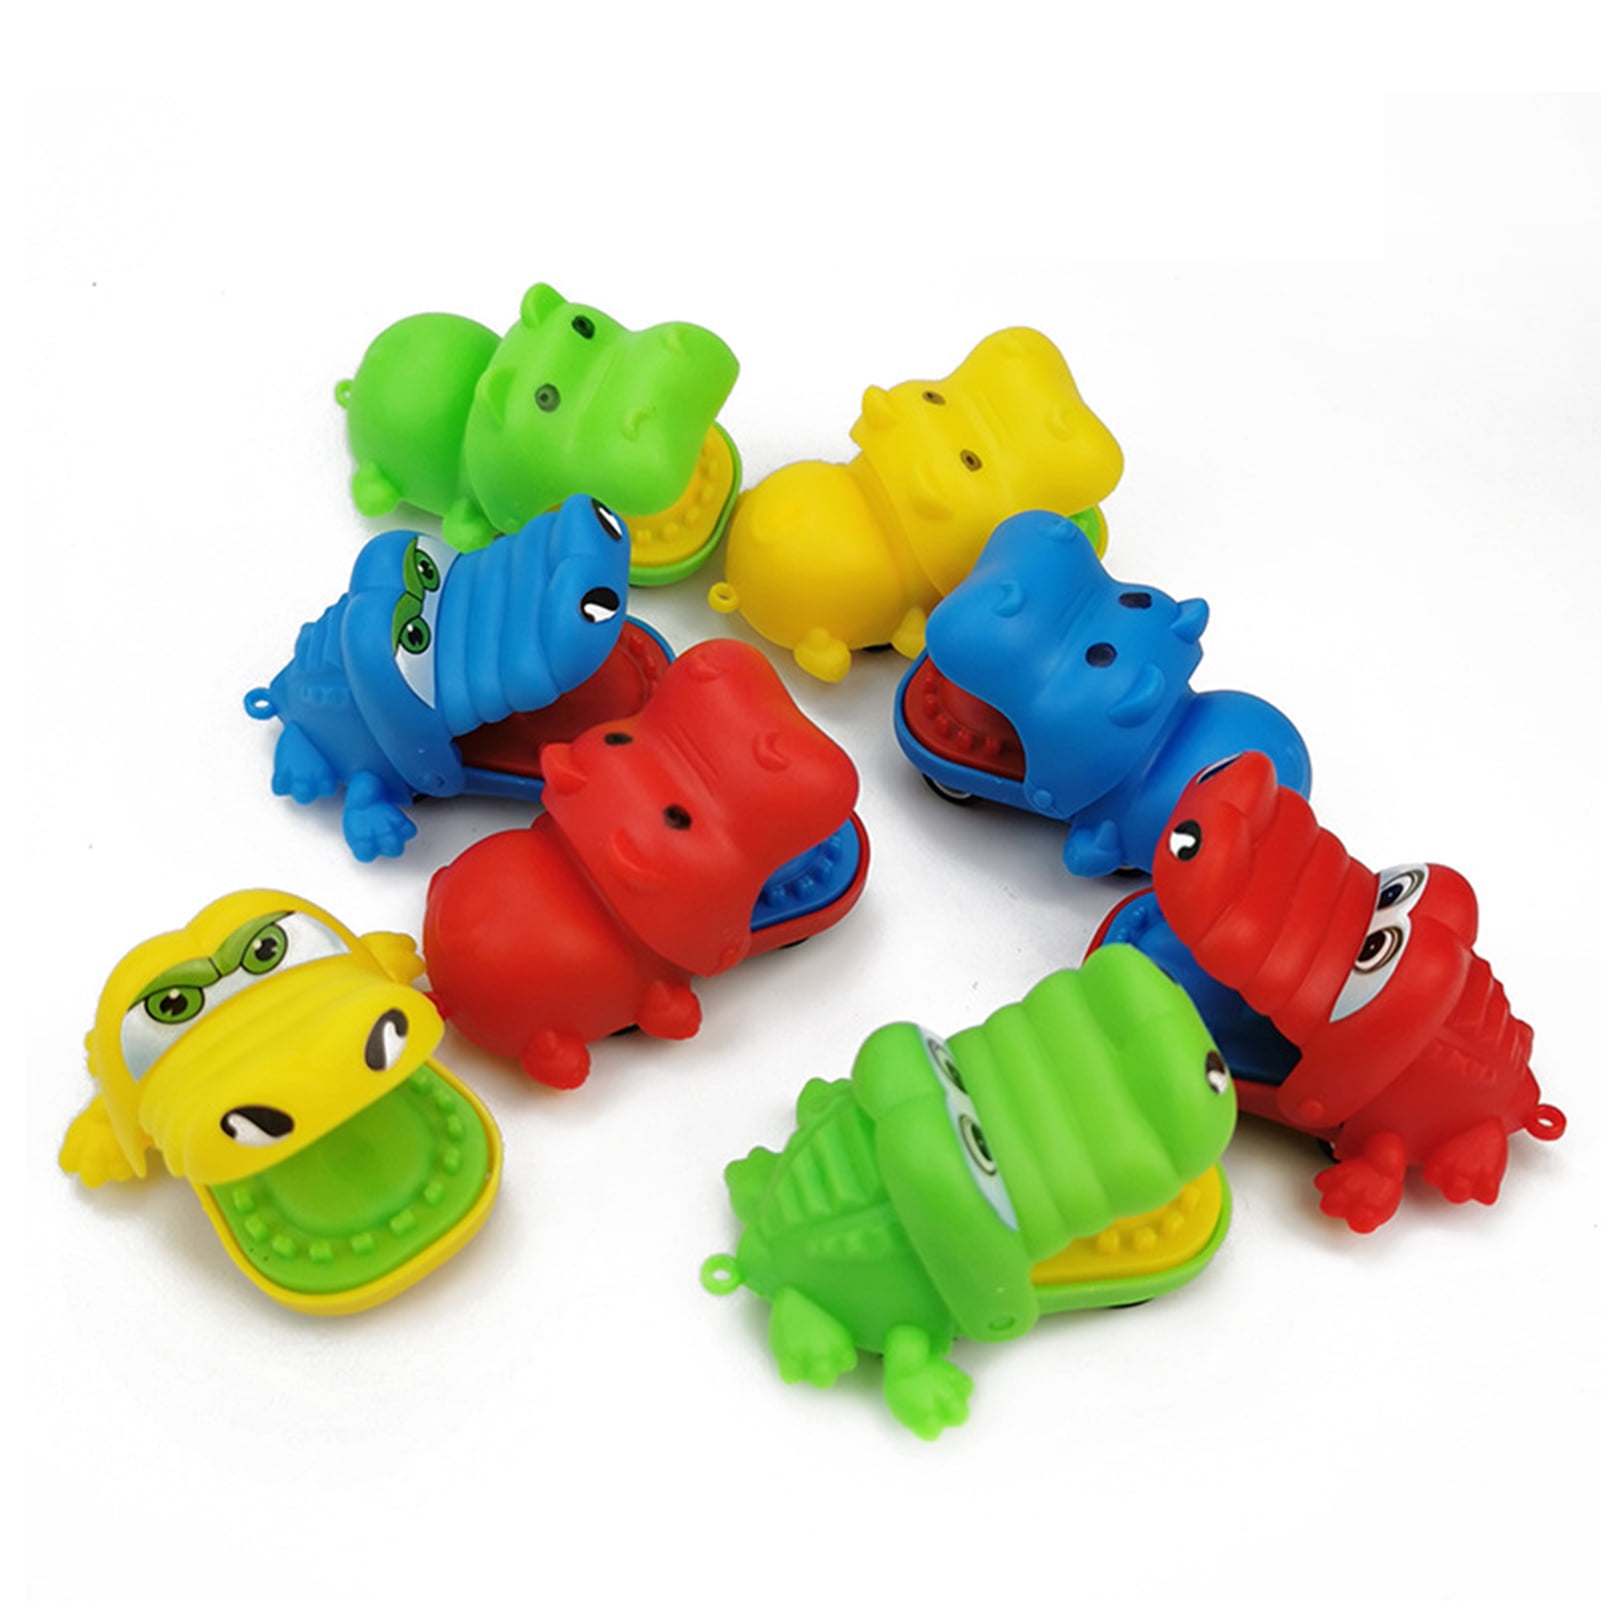 Details about   3Pcs Animal Cartoon Big Mouth Crocodile Hippo Mold Pull Back Mini Car Puzzle Toy 